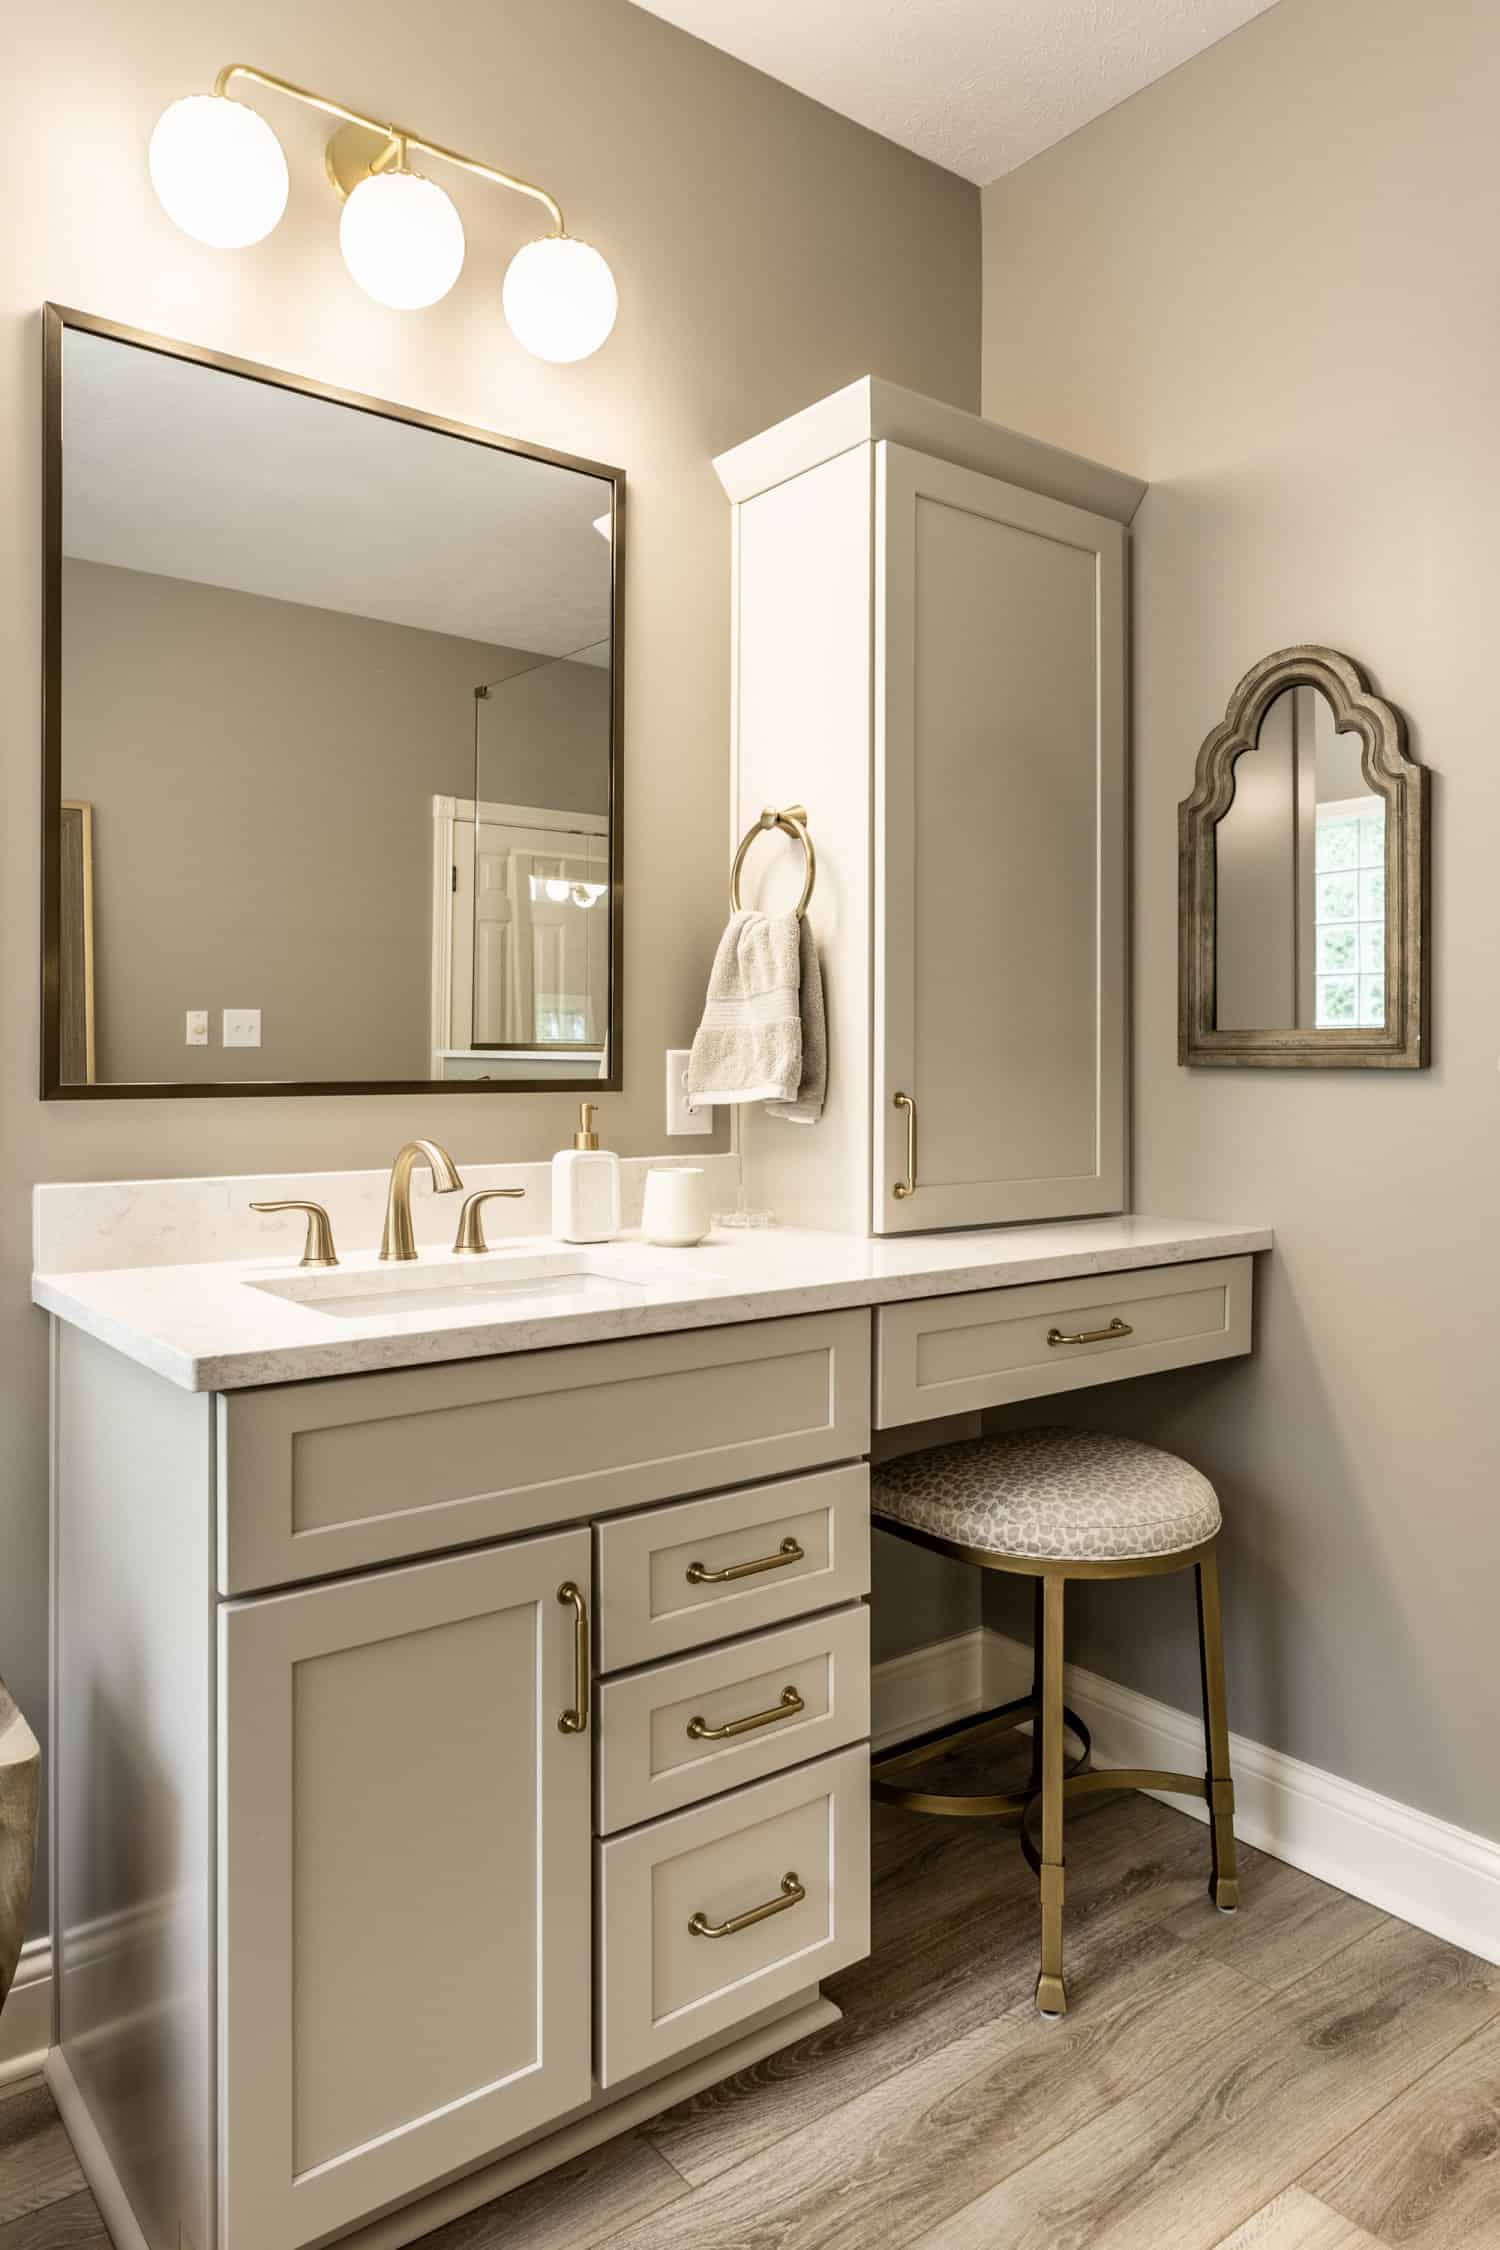 Nicholas Design Build | A modern bathroom with a vanity, sink, and mirror in brushed gold.